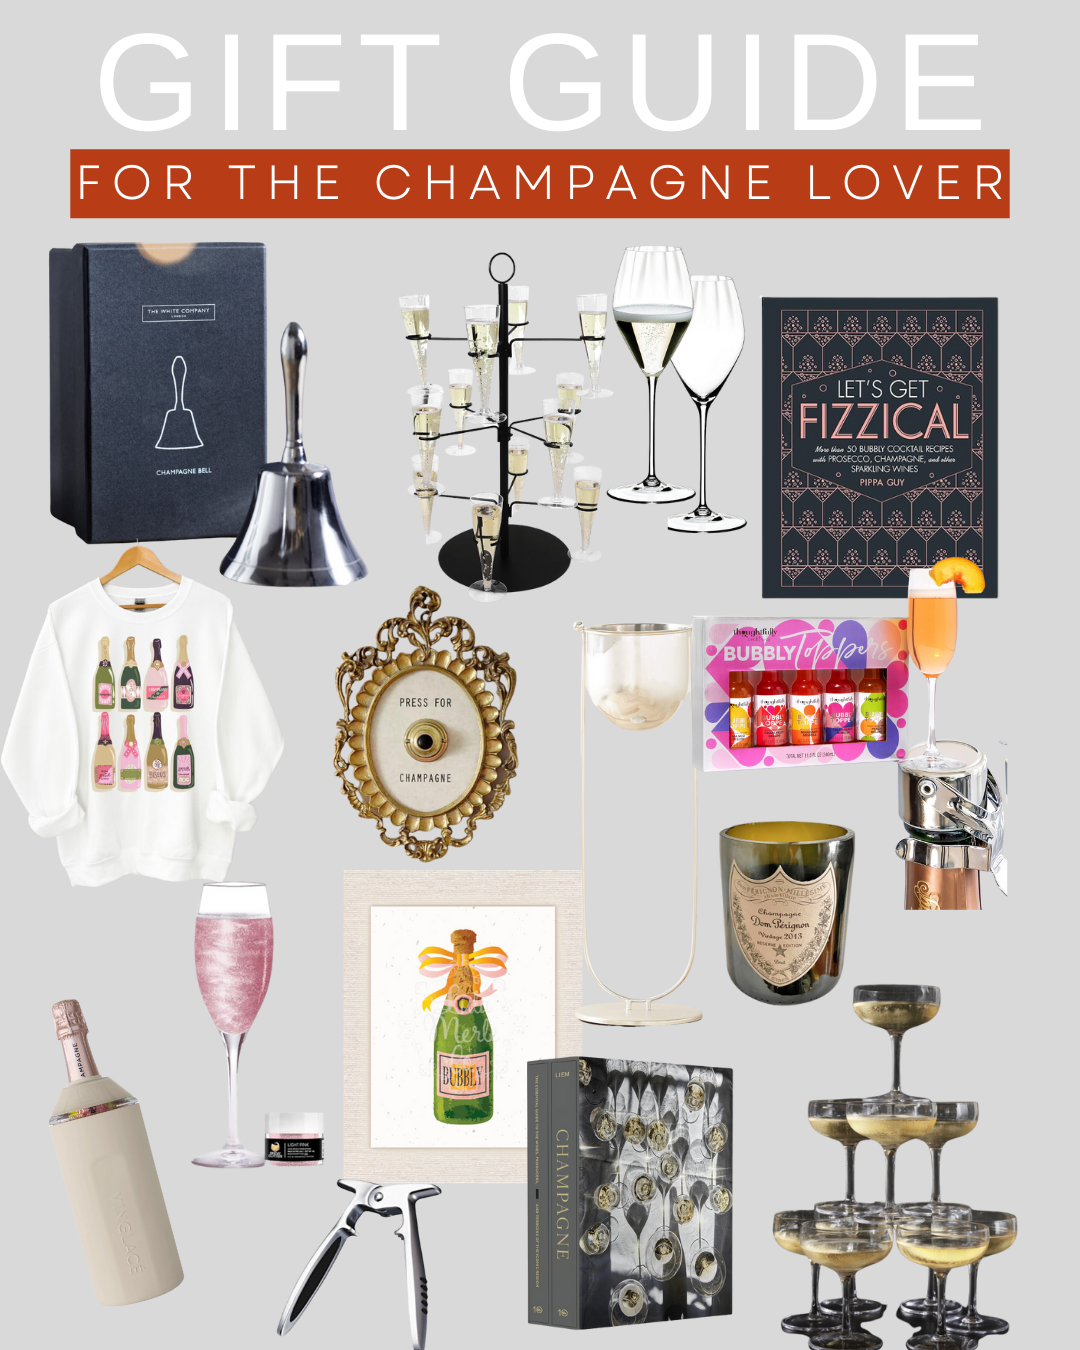 Gift Guide - For the Champagne lover.png